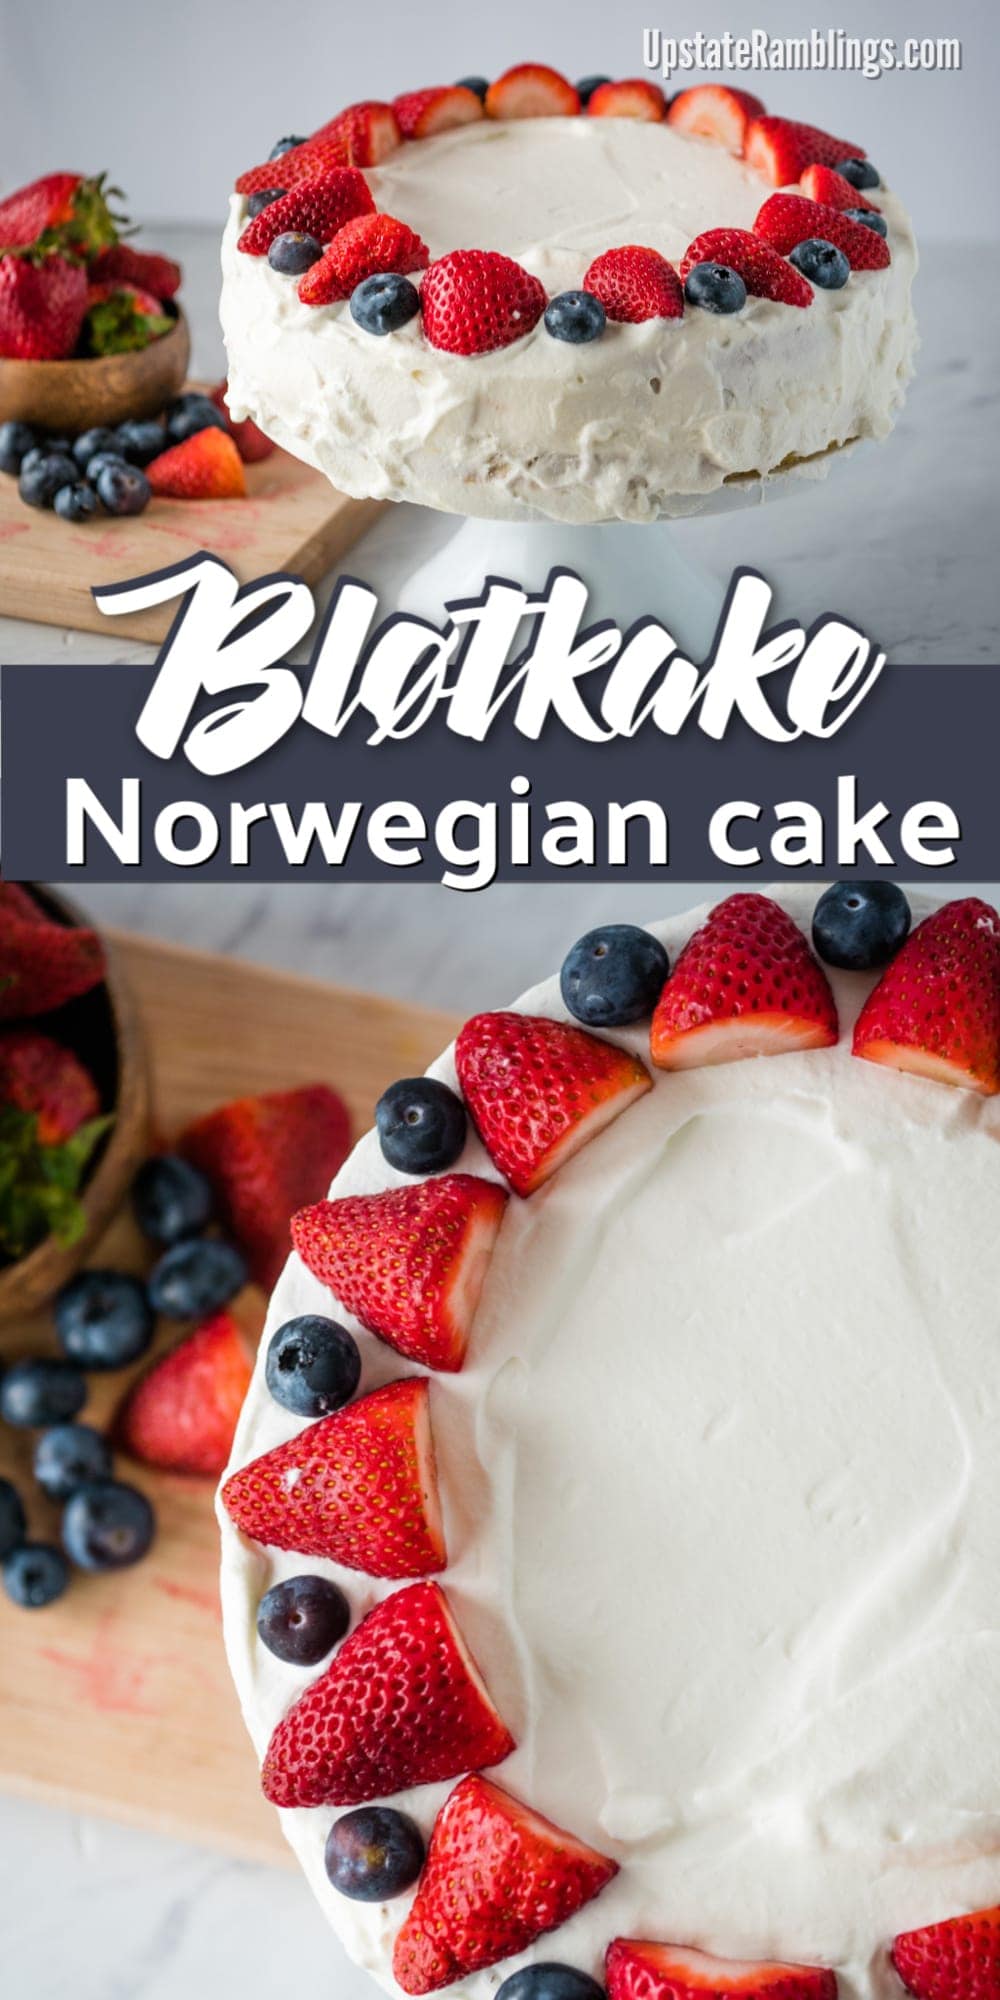 Make this traditional Norwegian Dessert - Bløtkake - a delicious sponge layer cake filled with pudding & peaches & cream, topped with whipped cream, blueberries and strawberries - Norwegian Cream Cake #norwegian #cake #dessert 